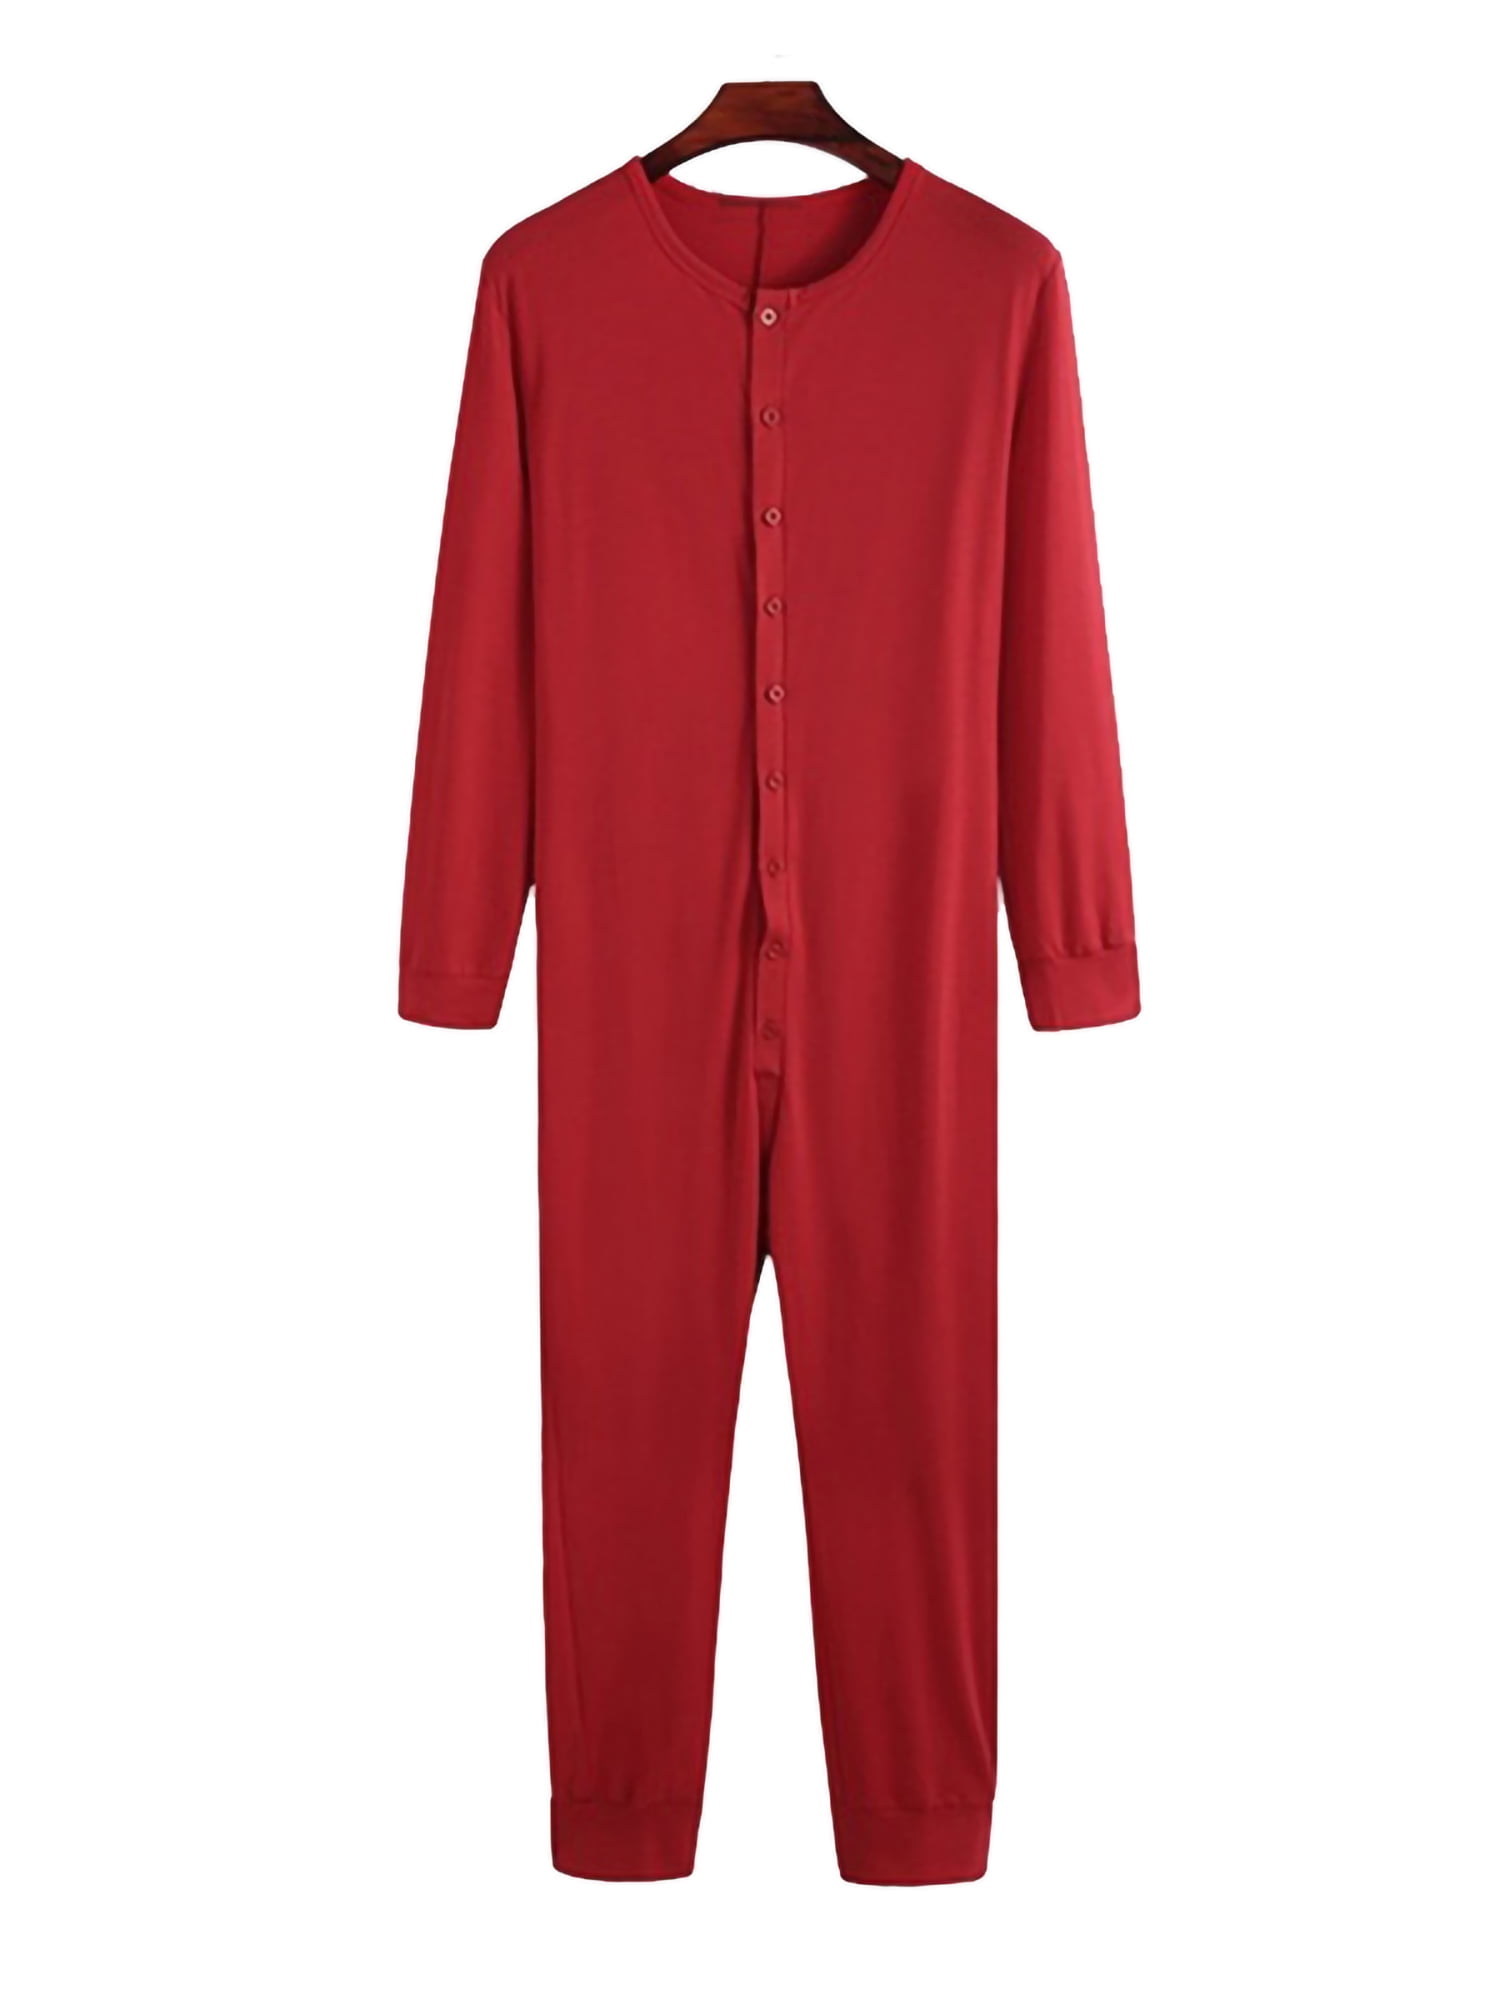 Details about   Mens one piece Long Sleeve Front Button Down Jumpsuit pyjamas Sleepwear Pajamas